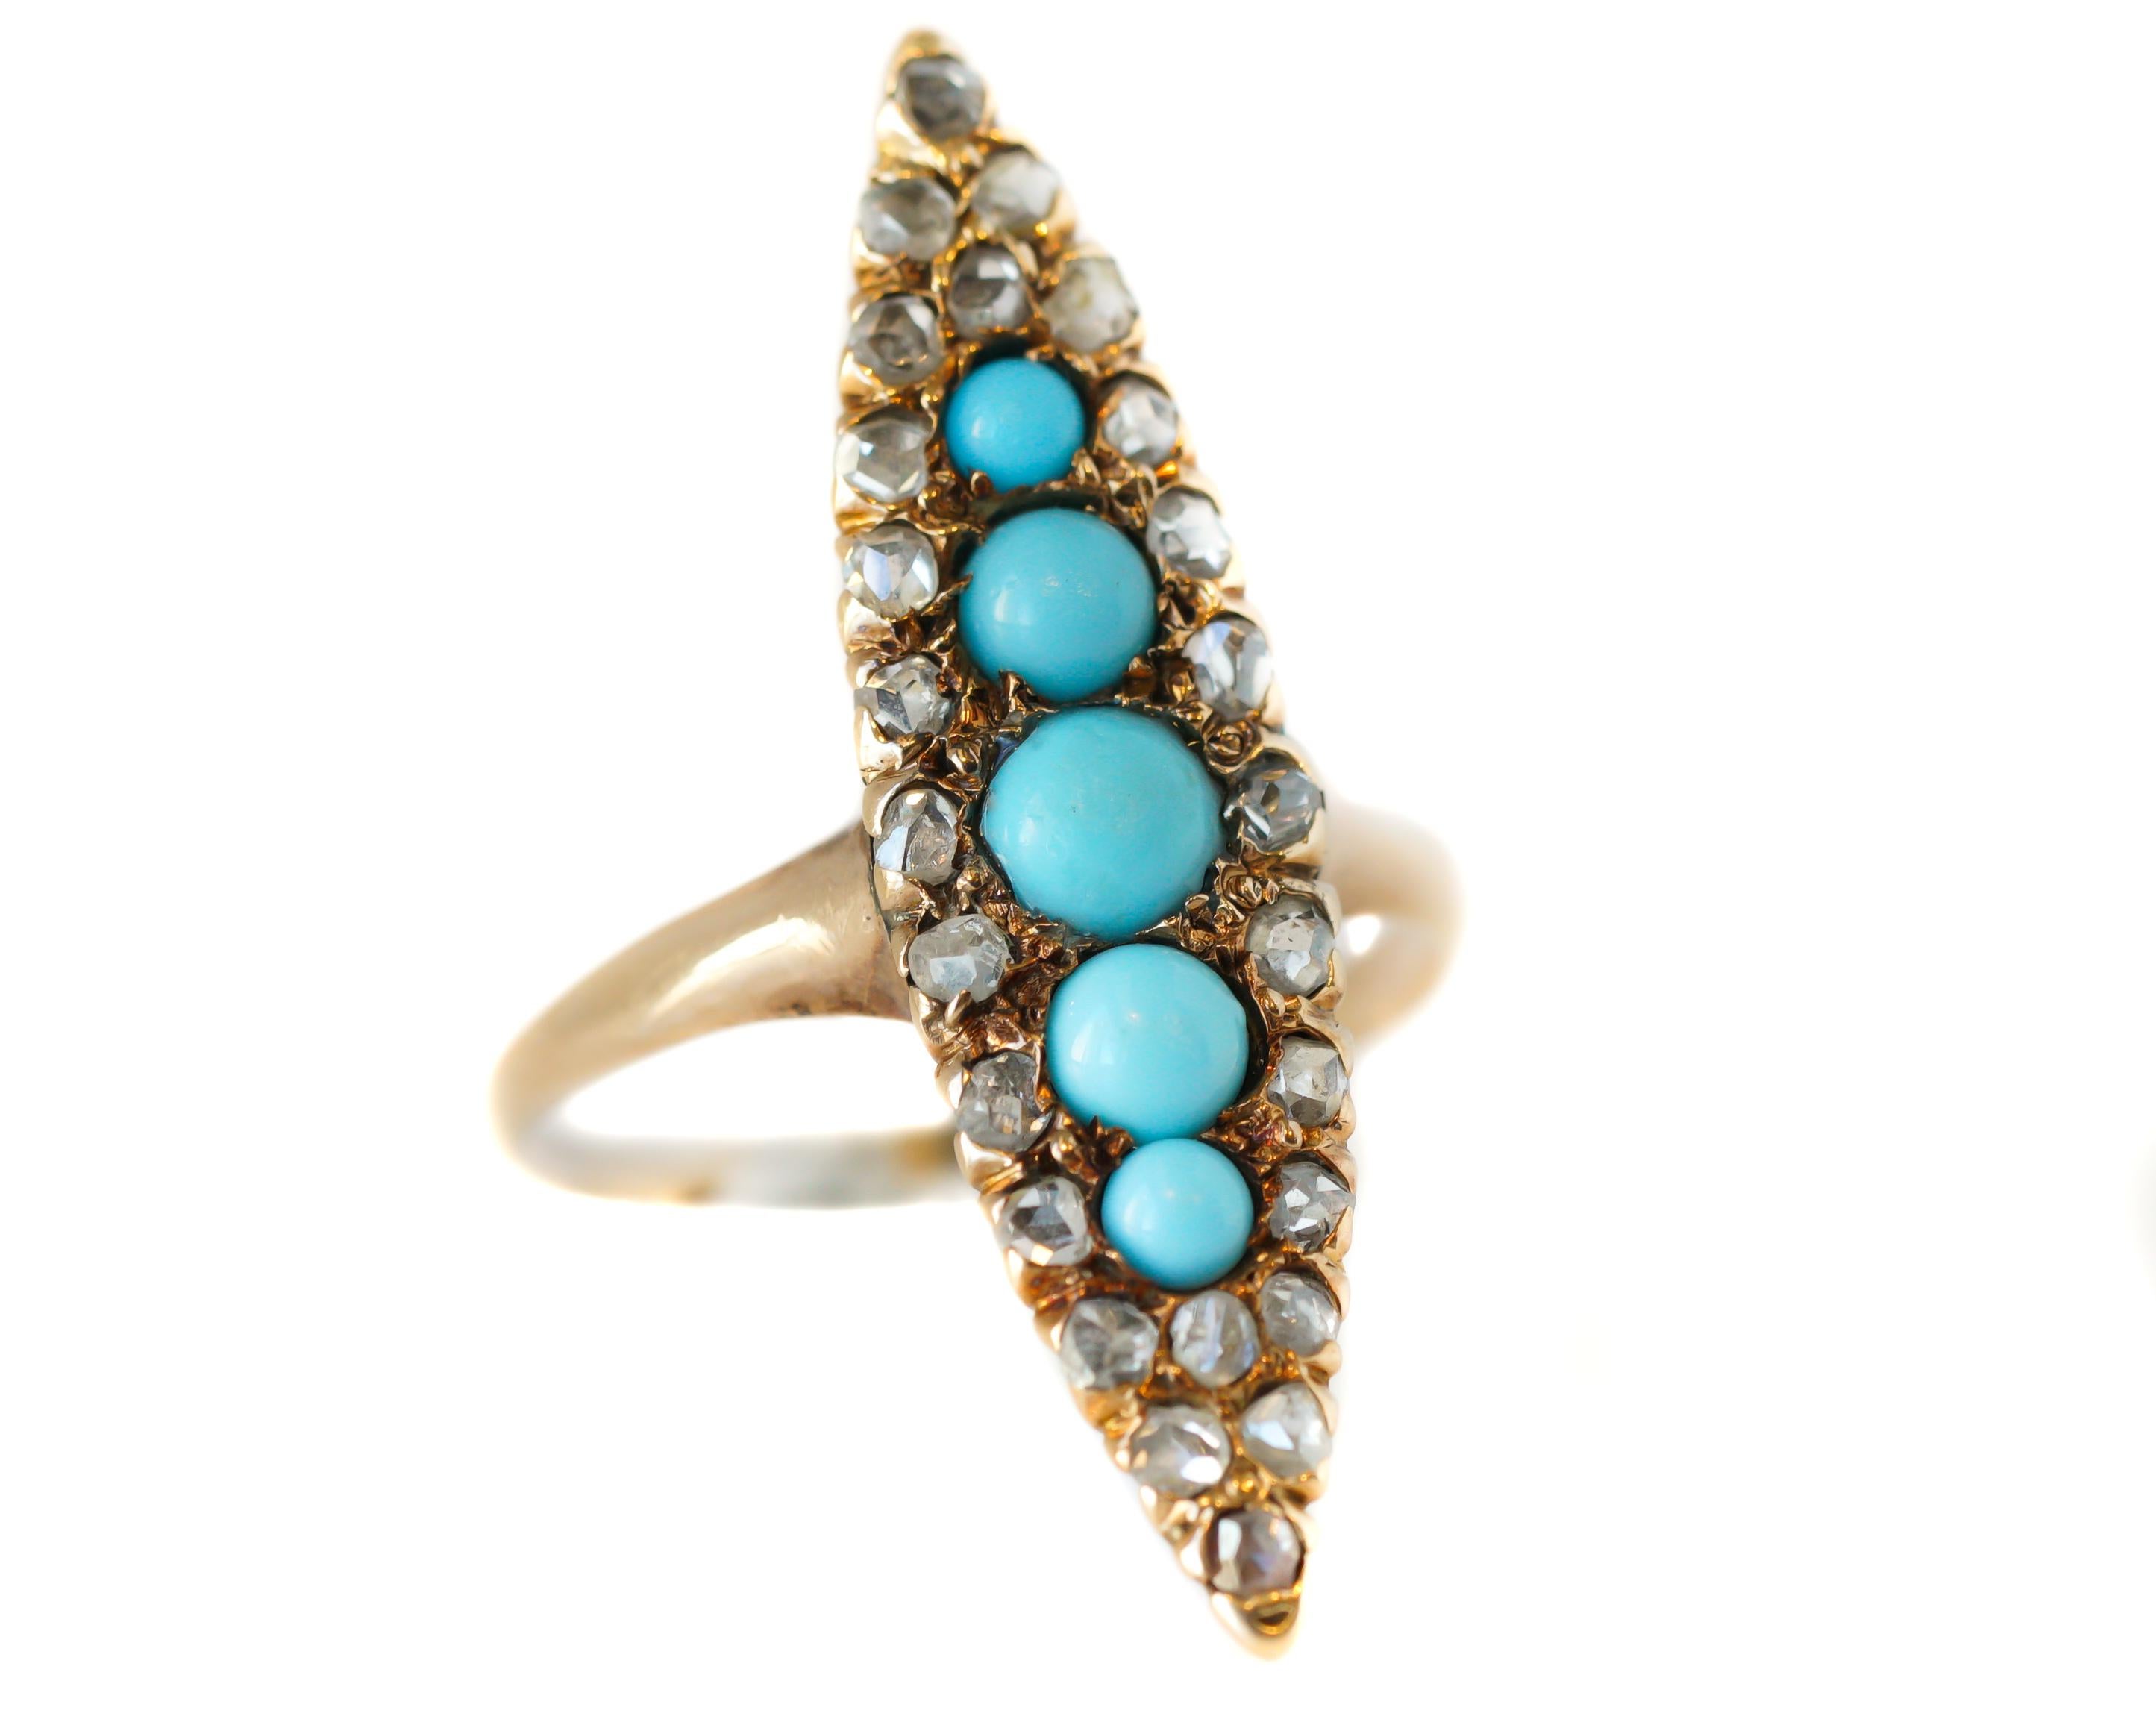 1850s Georgian Marquise Ring crafted in 9 karat Yellow Gold with Turquoise and  Rose Cut Diamonds

Features:
26 Rose cut Diamonds and 5 Round Turquoise Cabochons
9 karat Yellow Gold Setting
Marquise Head
1850s Georgian Design

Ring Head measures 30